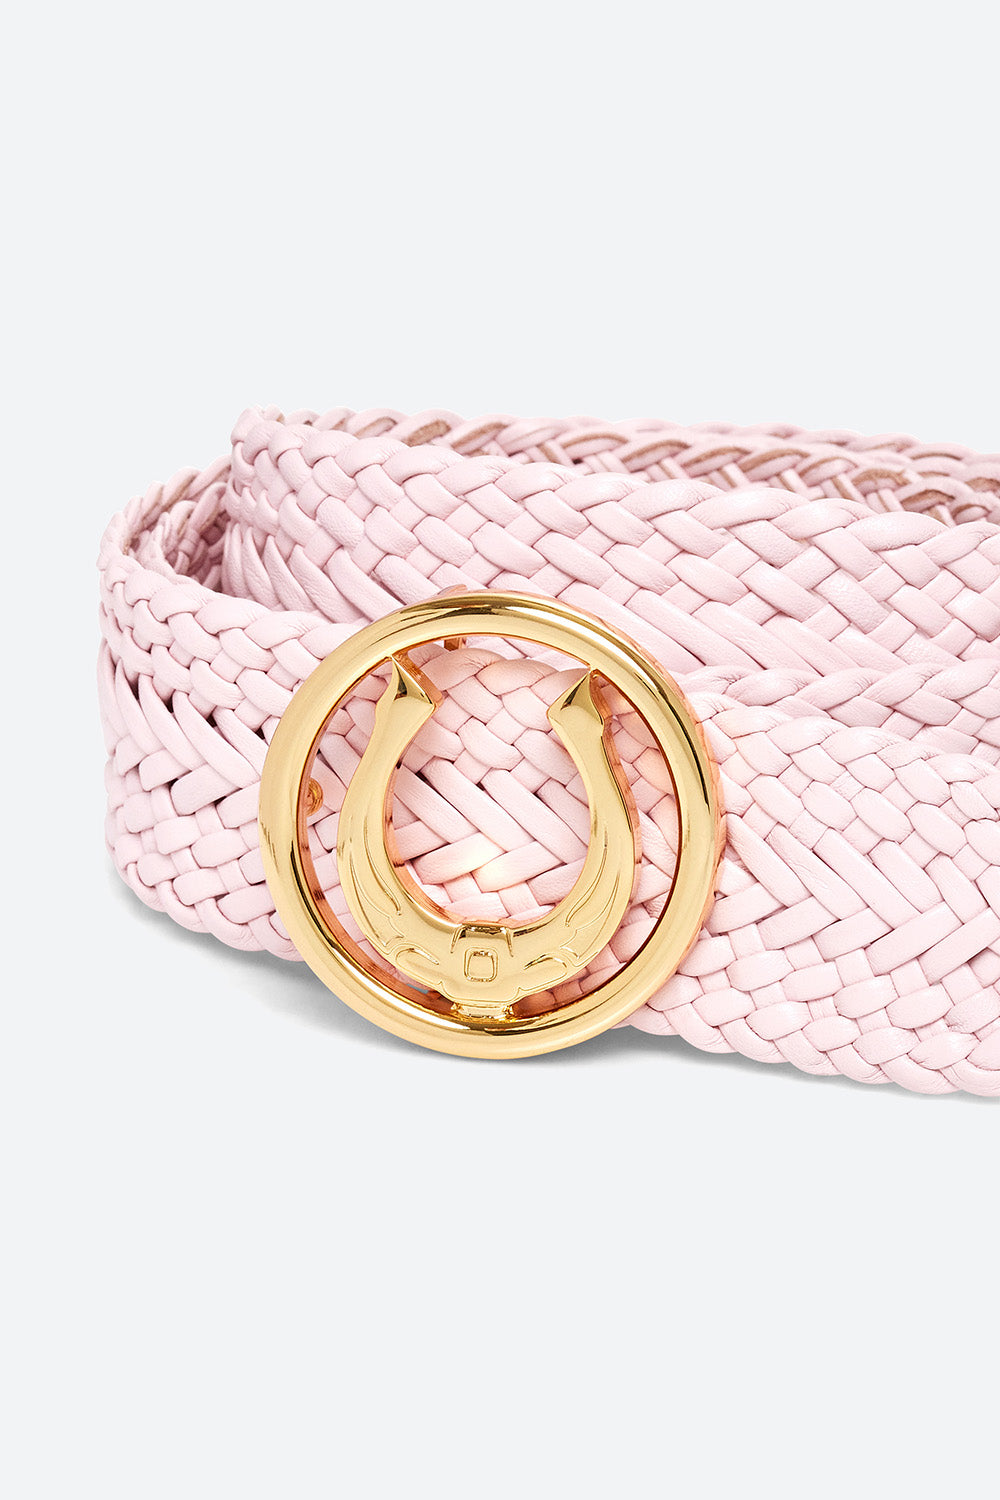 Men's Lucky Belt in Peony Pink, Polished Gold-toned Horseshoe Buckle